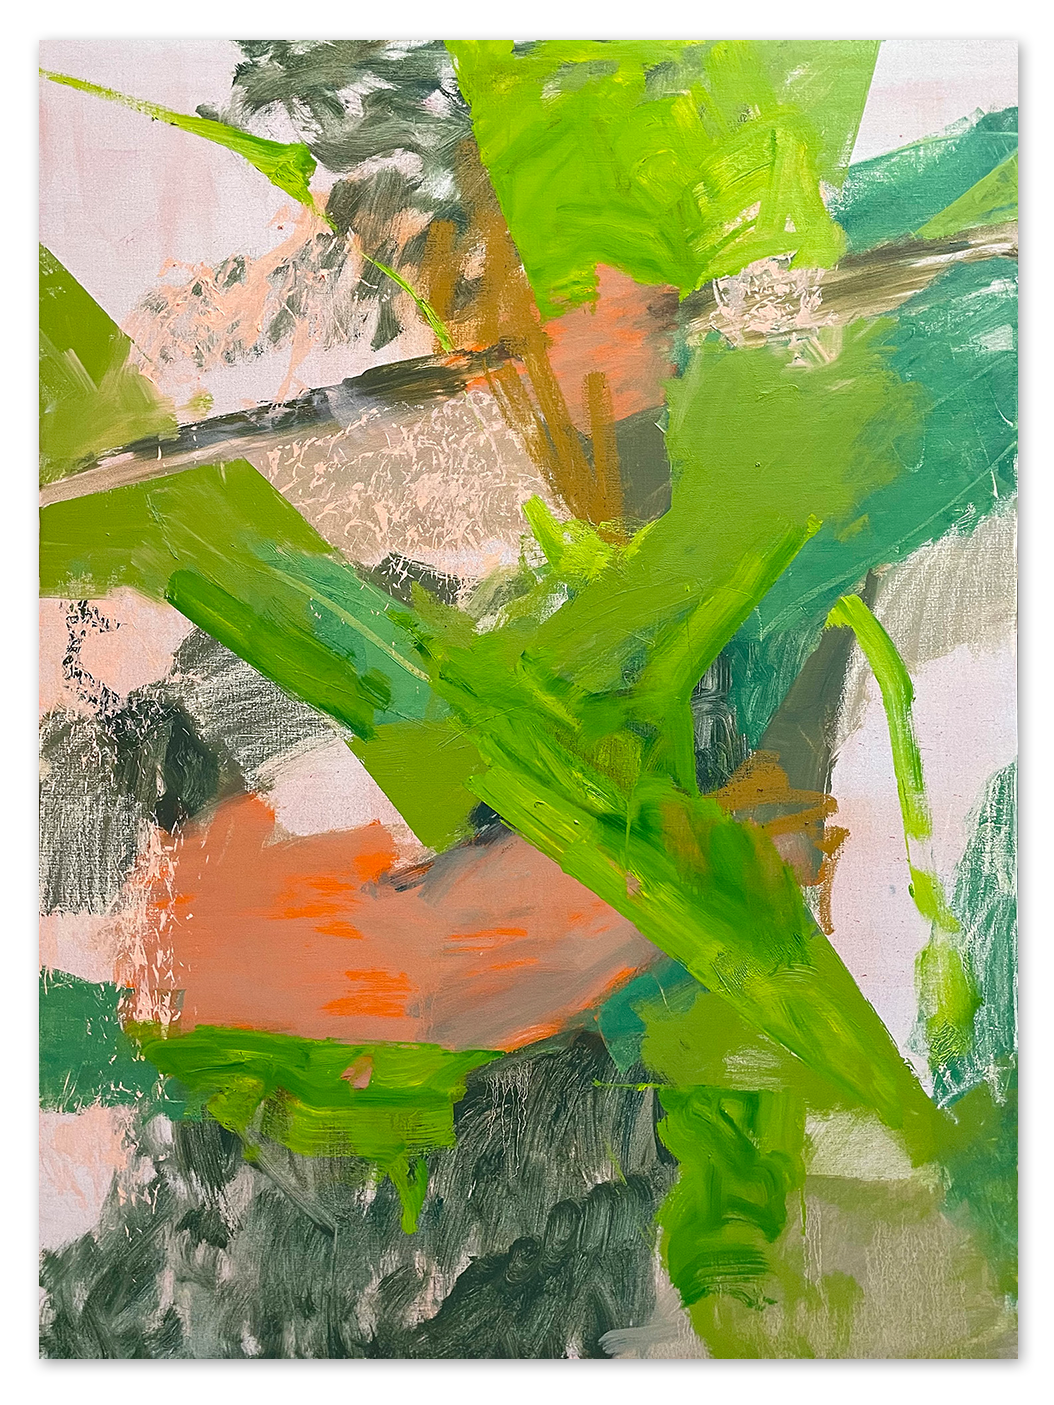 An abstract oil painting in different shades of green